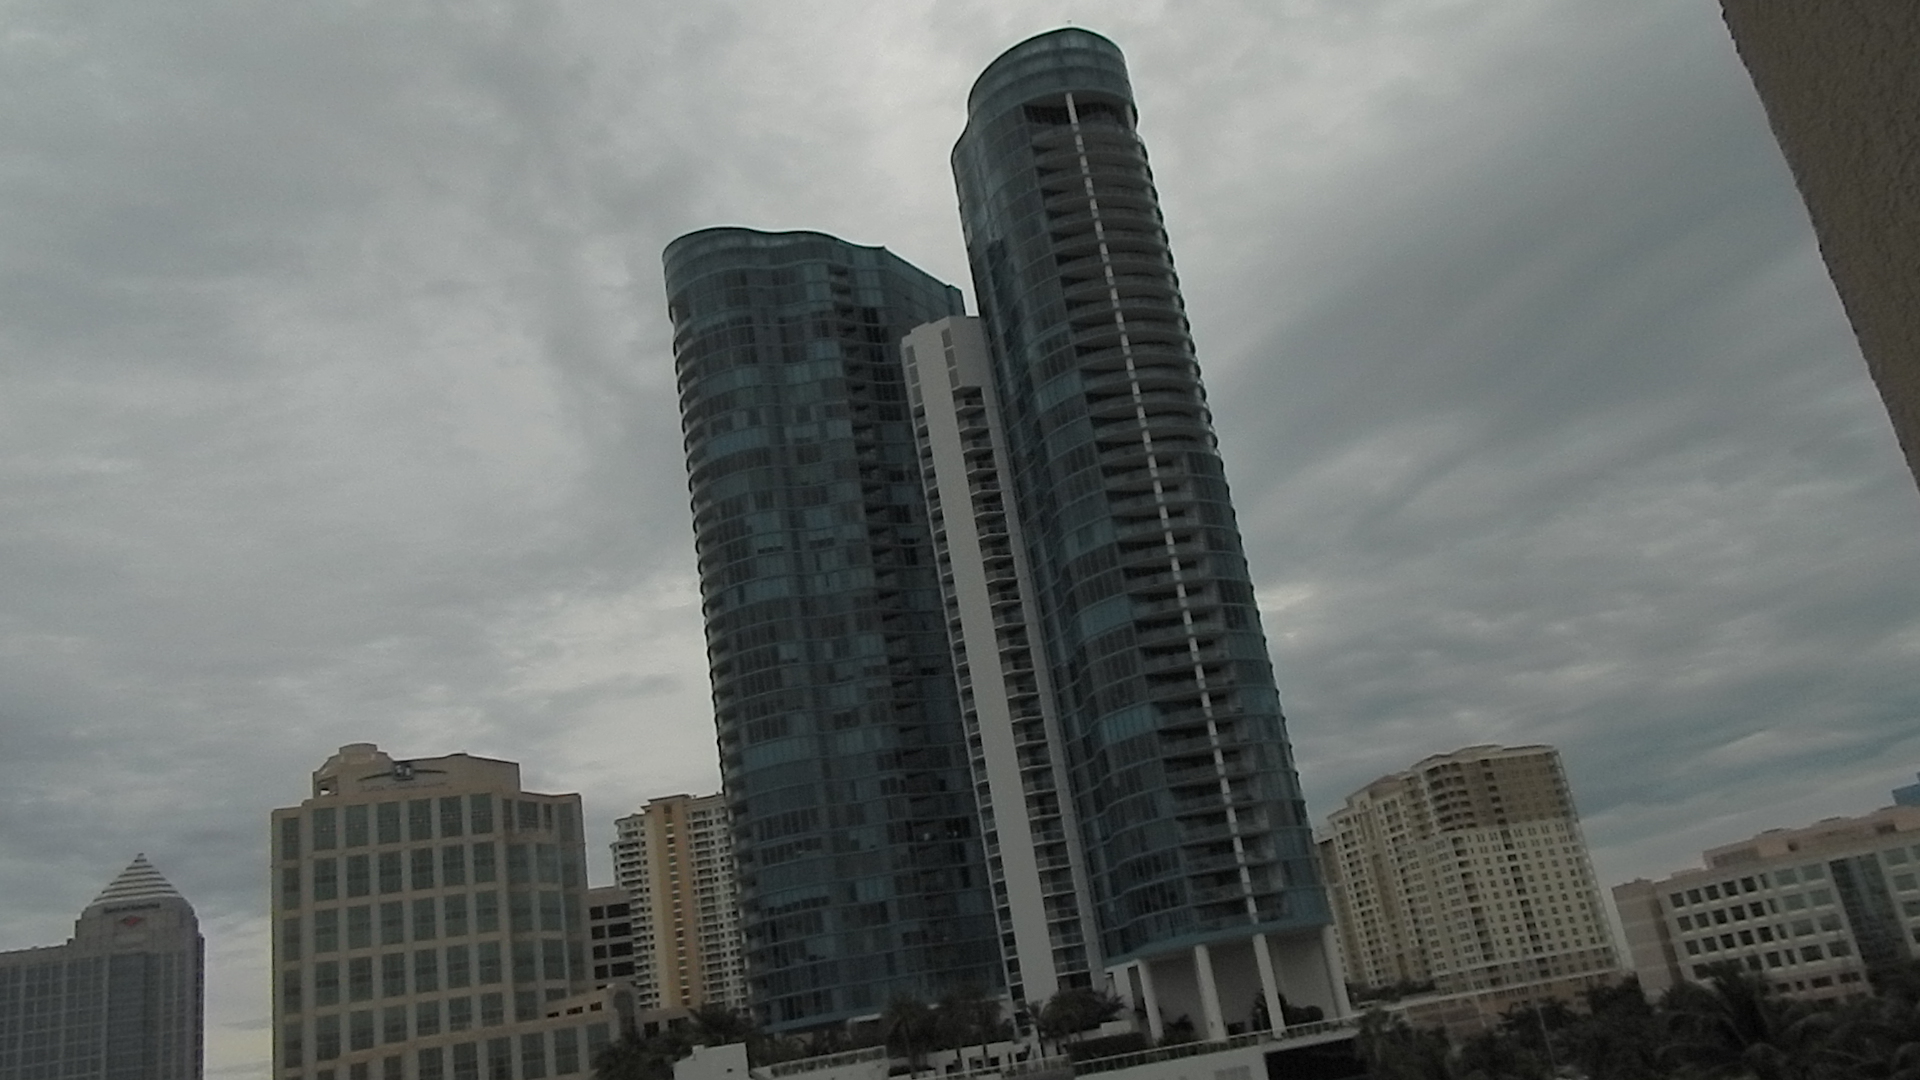 three high rise buildings under cloudy skies in a city